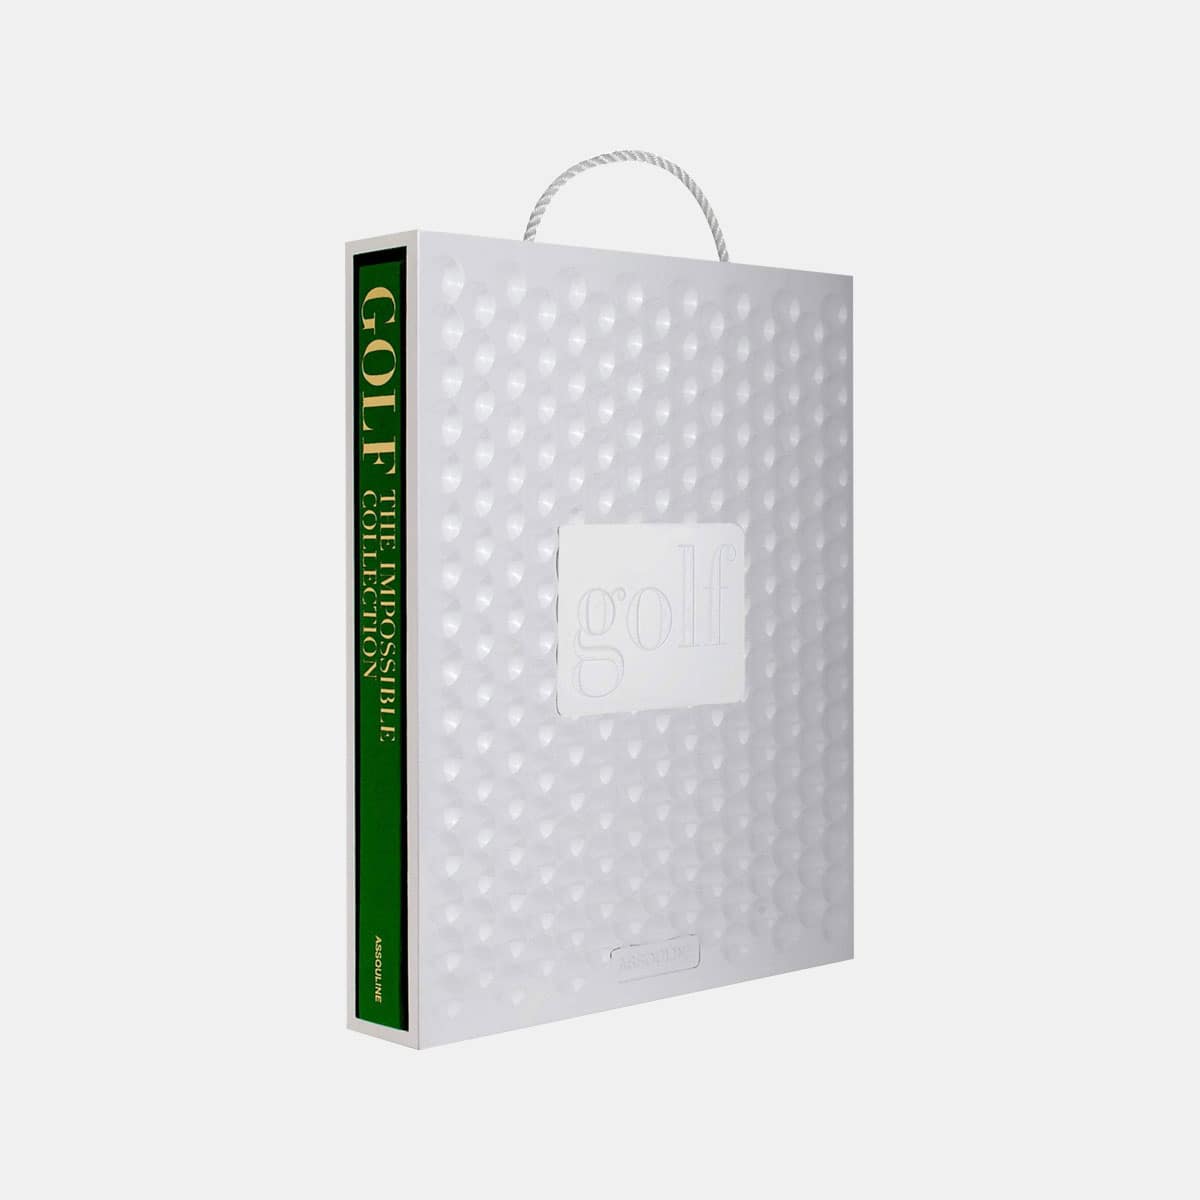 assouline-george-peper-golf-the-impossible-collection-001shop